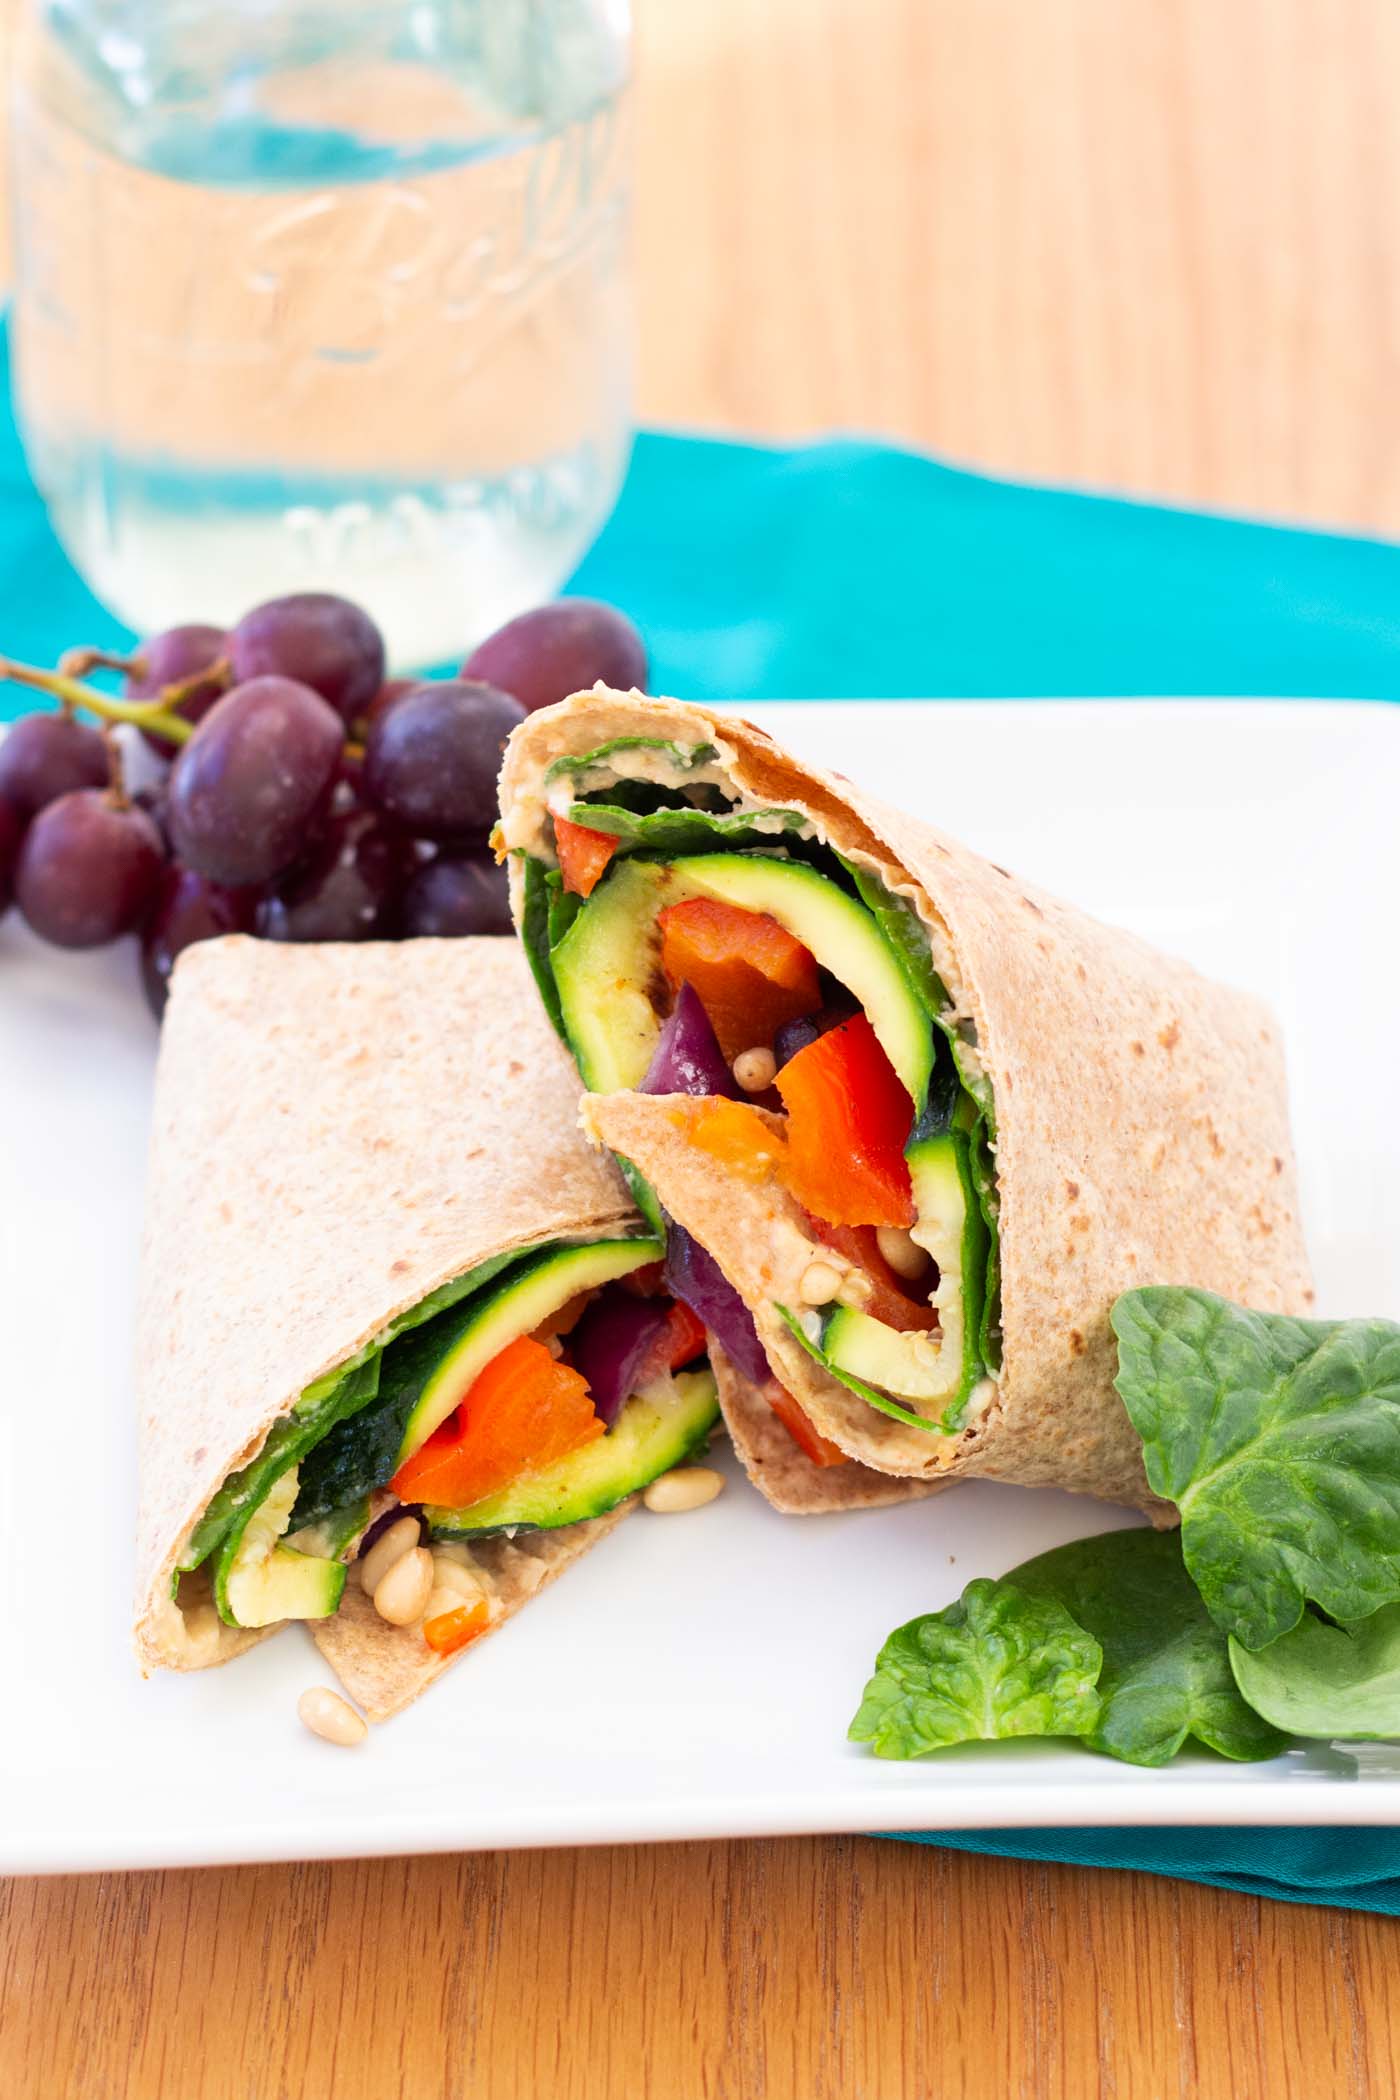 Grilled vegetable hummus wrap served with grapes.